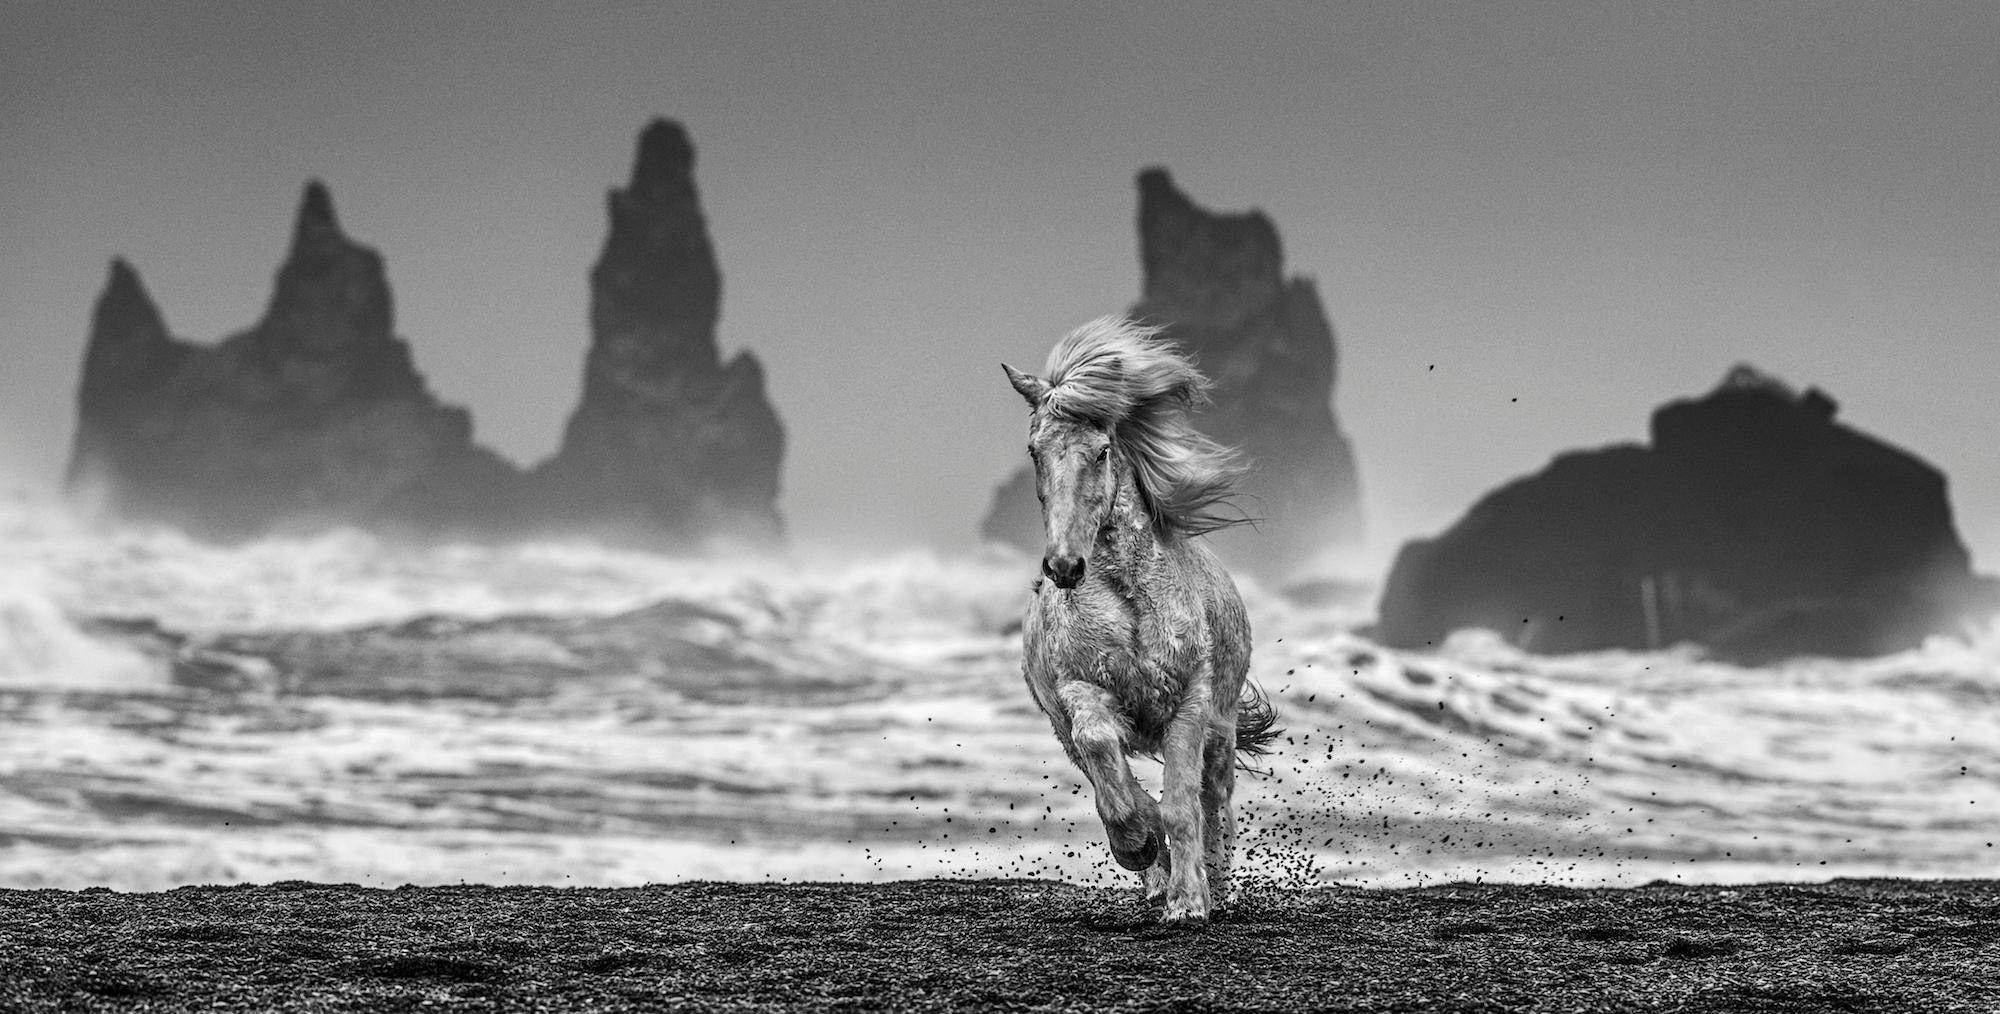 David Yarrow Black and White Photograph - White Horses, Archival Pigment Print , Contemporary Black and White photography